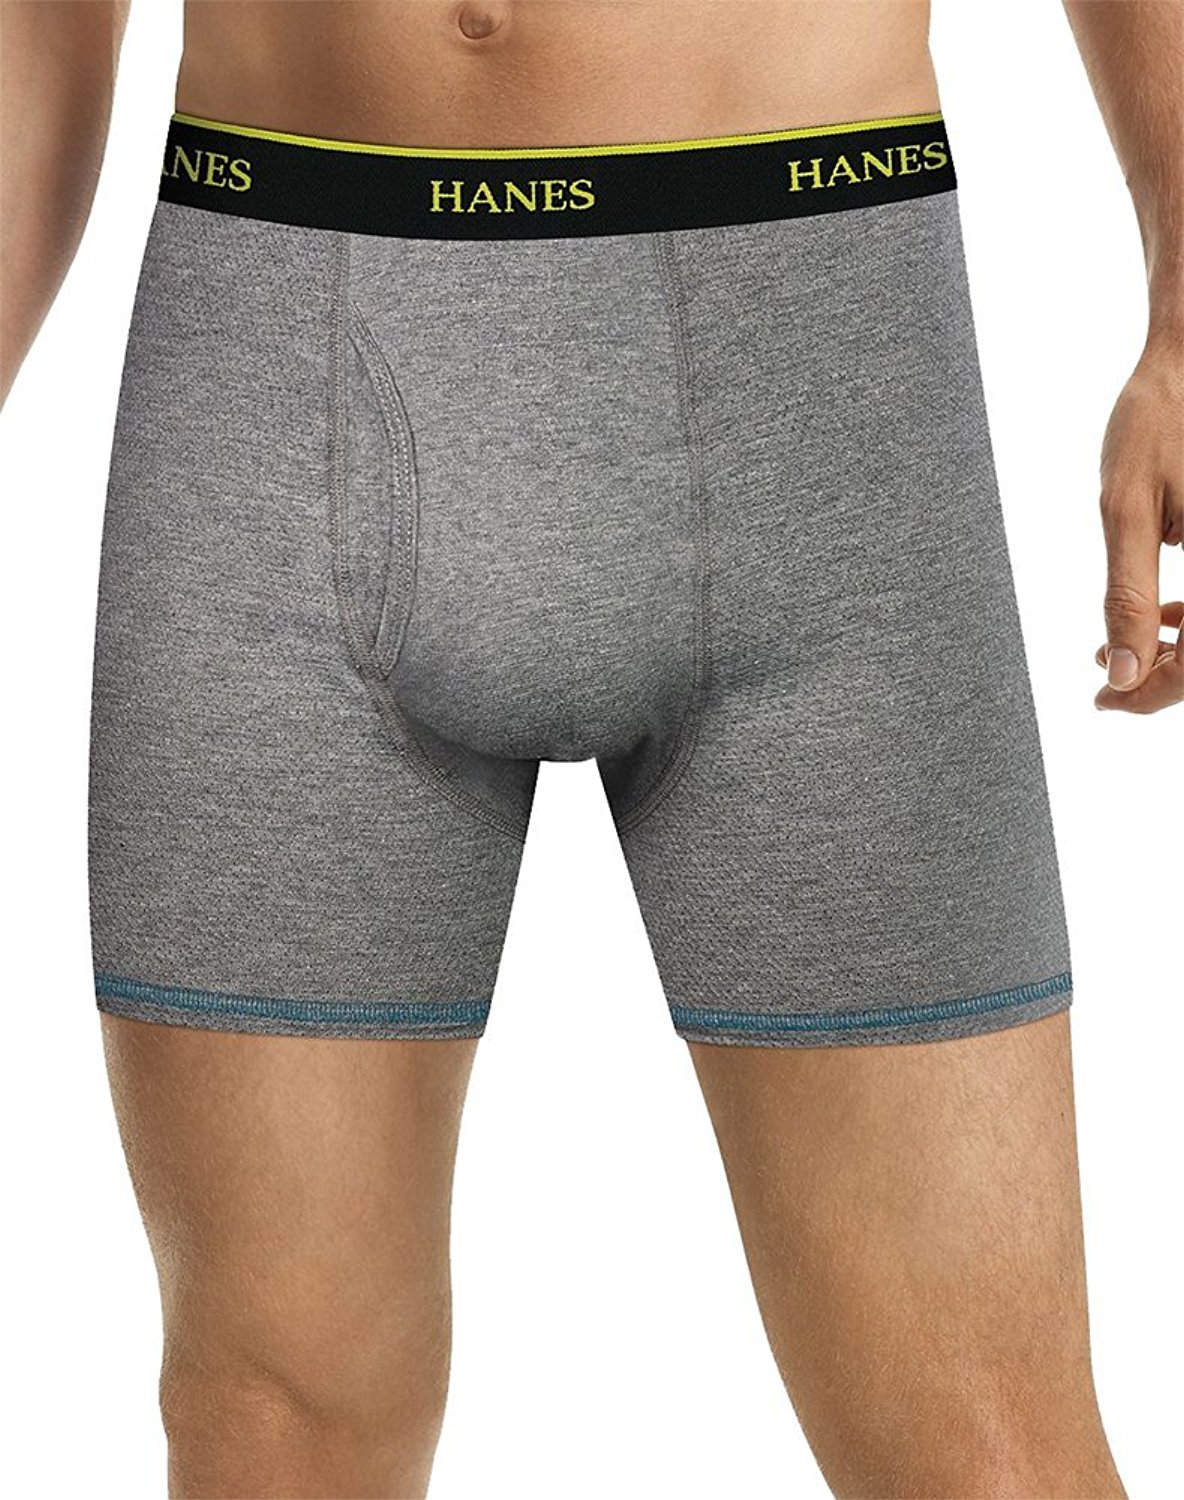 HANES - MESH BOXERS - ASSORTED - 5 PACK - FreshIQ Breathable Mesh Boxer - XLARGE - XL